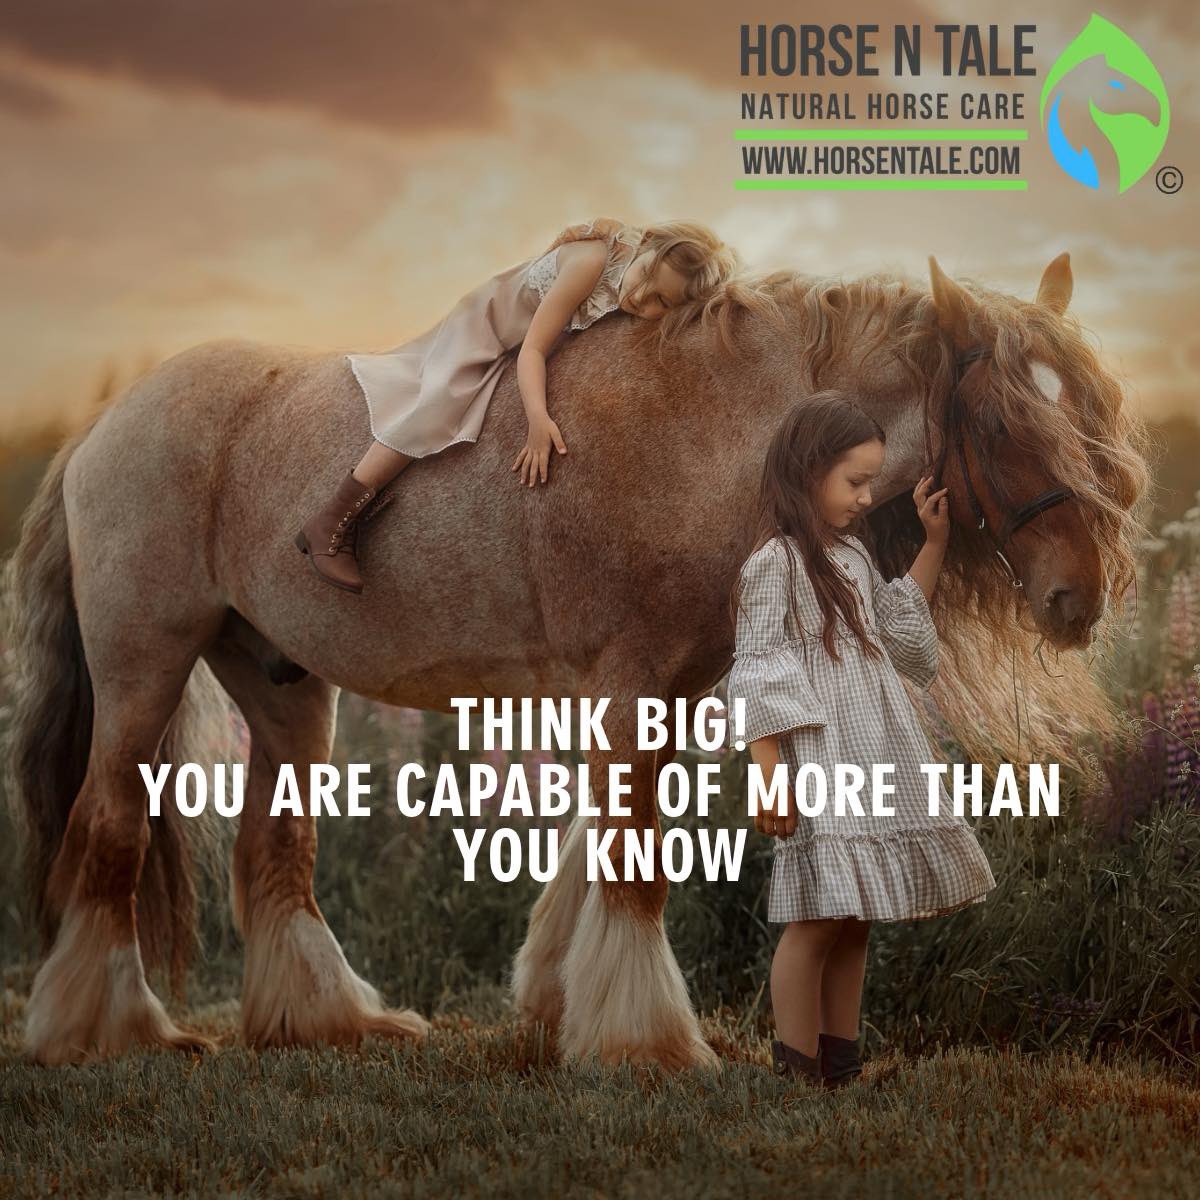 Monday Motivation.

THINK BIG!
YOU ARE CAPABLE OF MORE THAN YOU KNOW

#horsentale #topicalequineproducts #naturalhorsecare #equine #horse #naturalingredients 
#teamhnt #teamhorsentale 
#barrelracing 
#motivationmonday #MondayMotivation #MondayMotivation #Monday #Mondaymindset